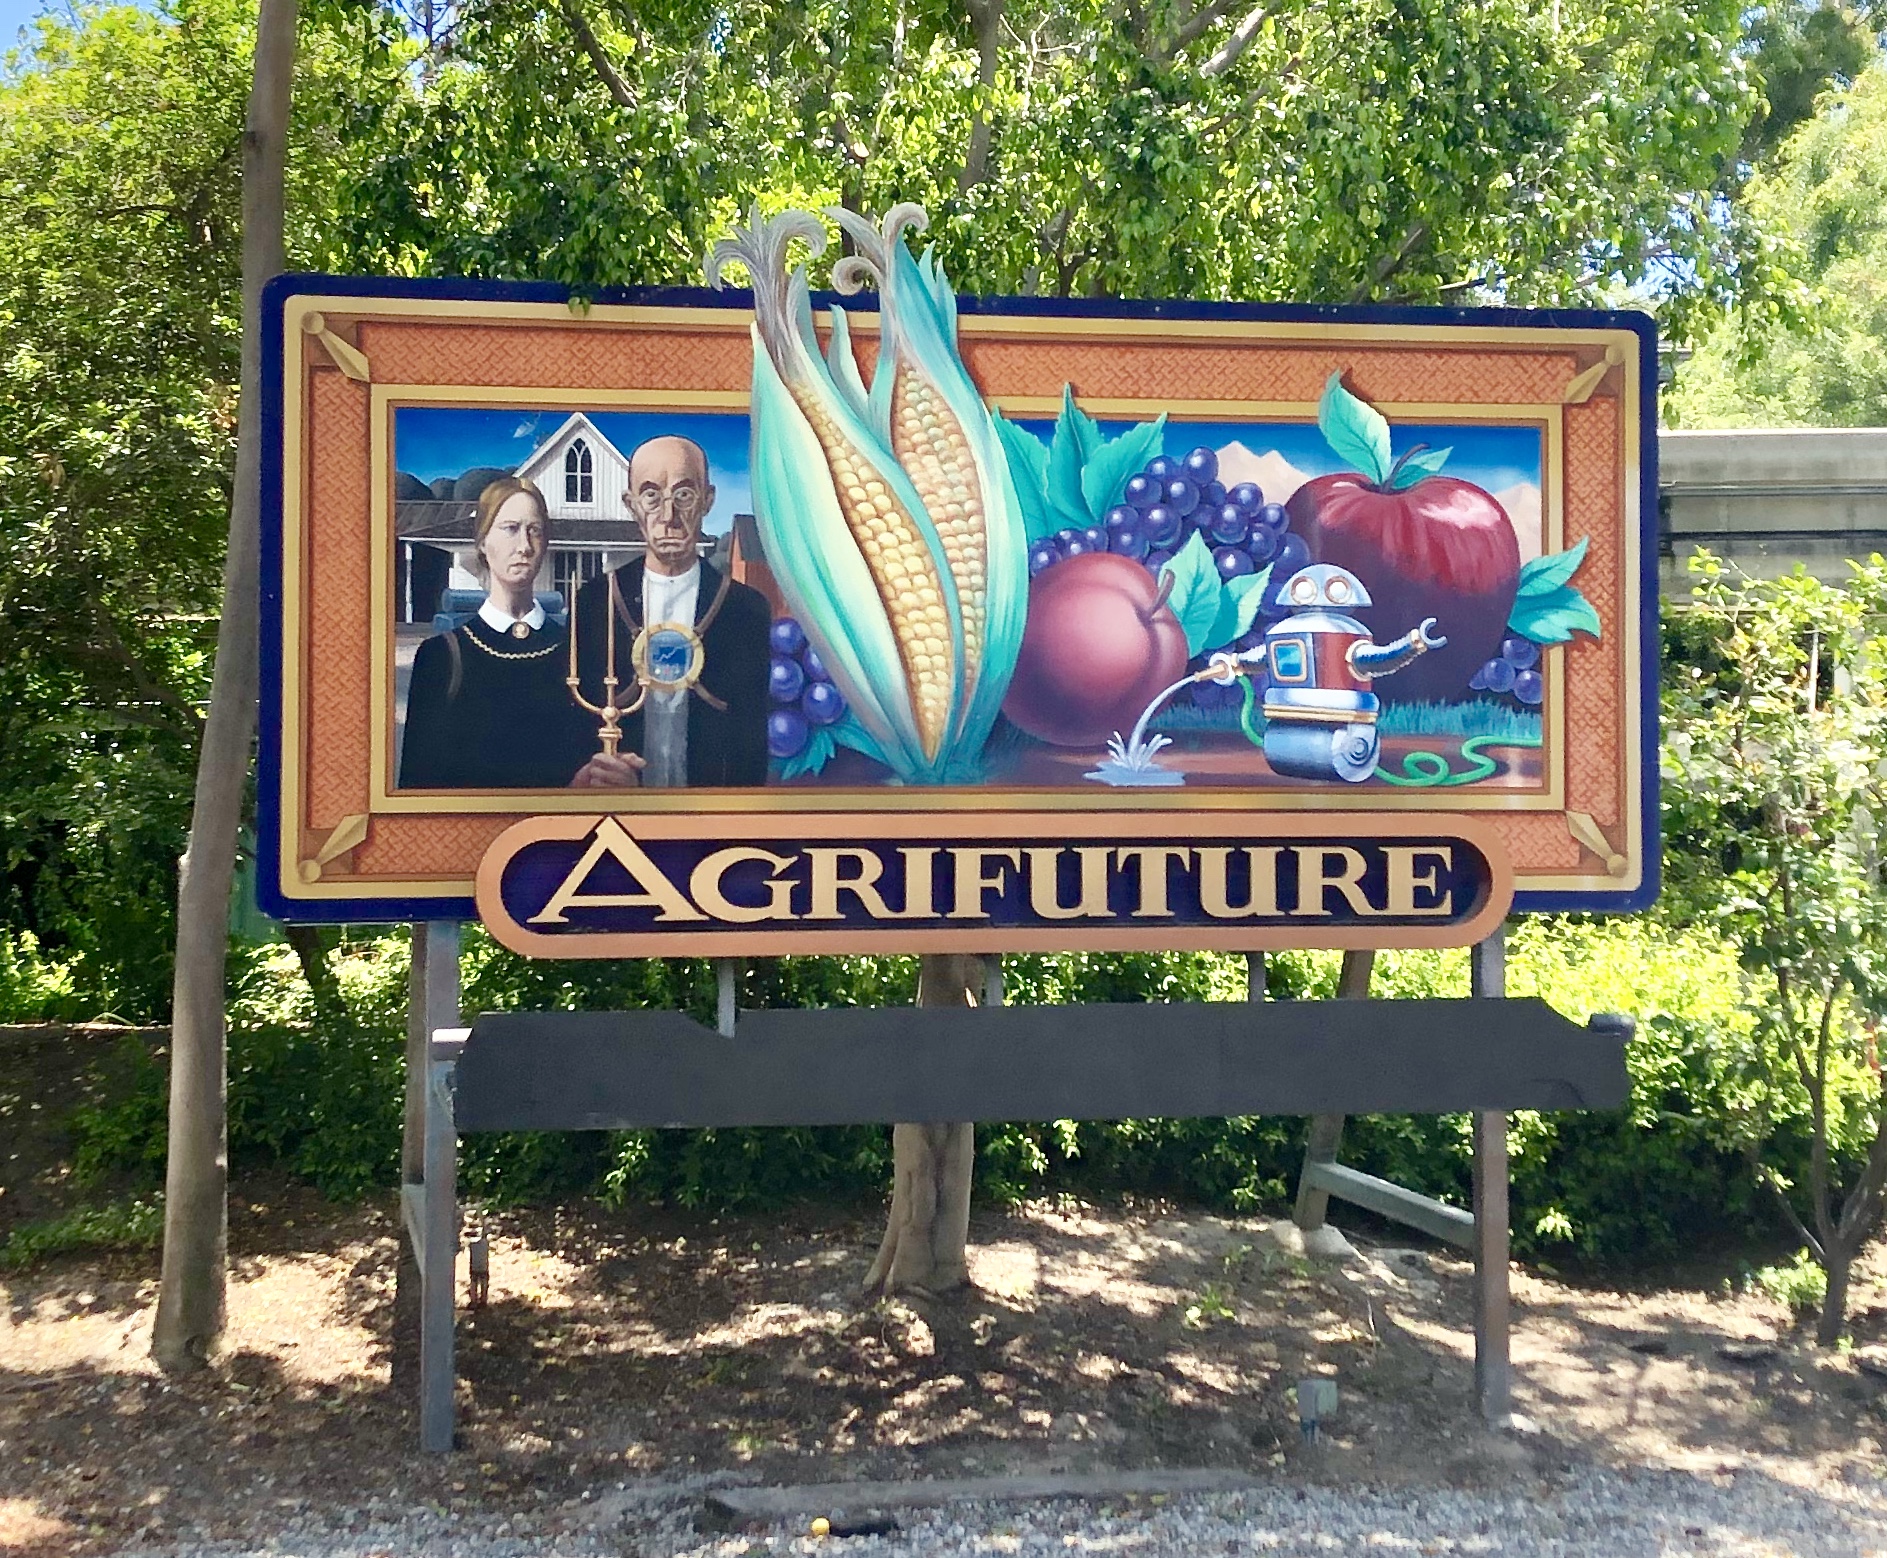 Agrifuture sign at Disneyland: Discover 5 secrets of Tomorrowland